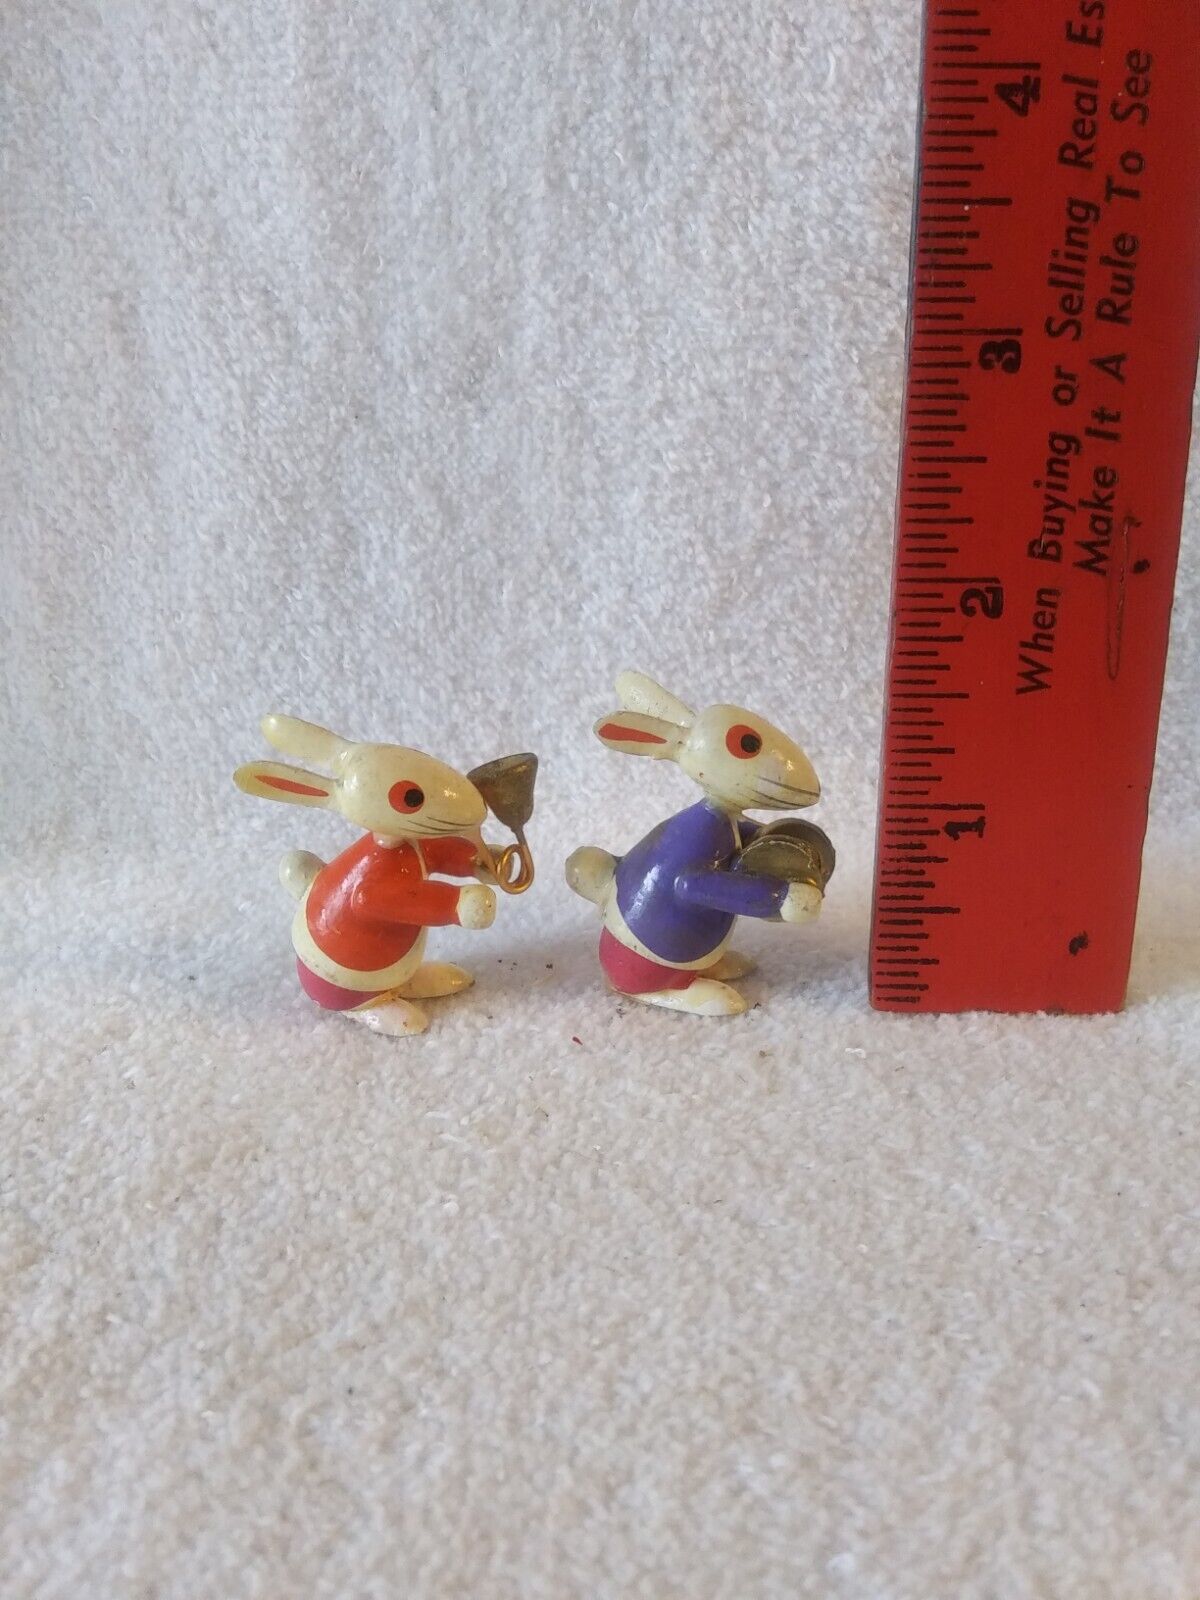 2 Vintage Wood Bunny Band Figurines Easter Rabbits Musical Miniatures 